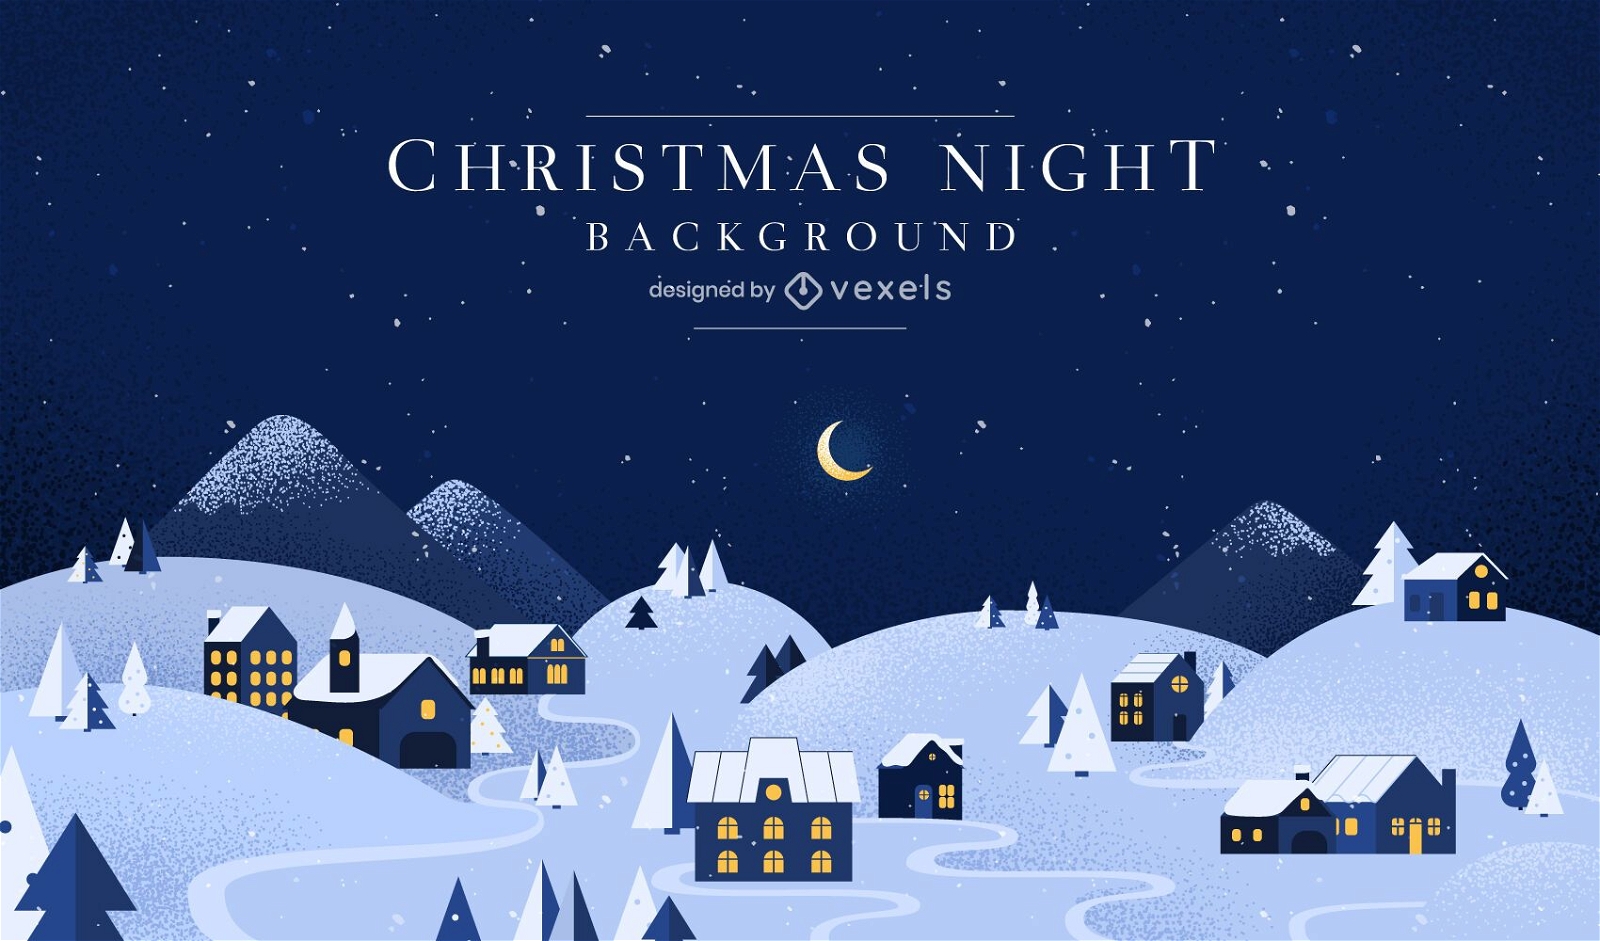 Download Christmas Night Background Design Vector Download SVG Cut Files